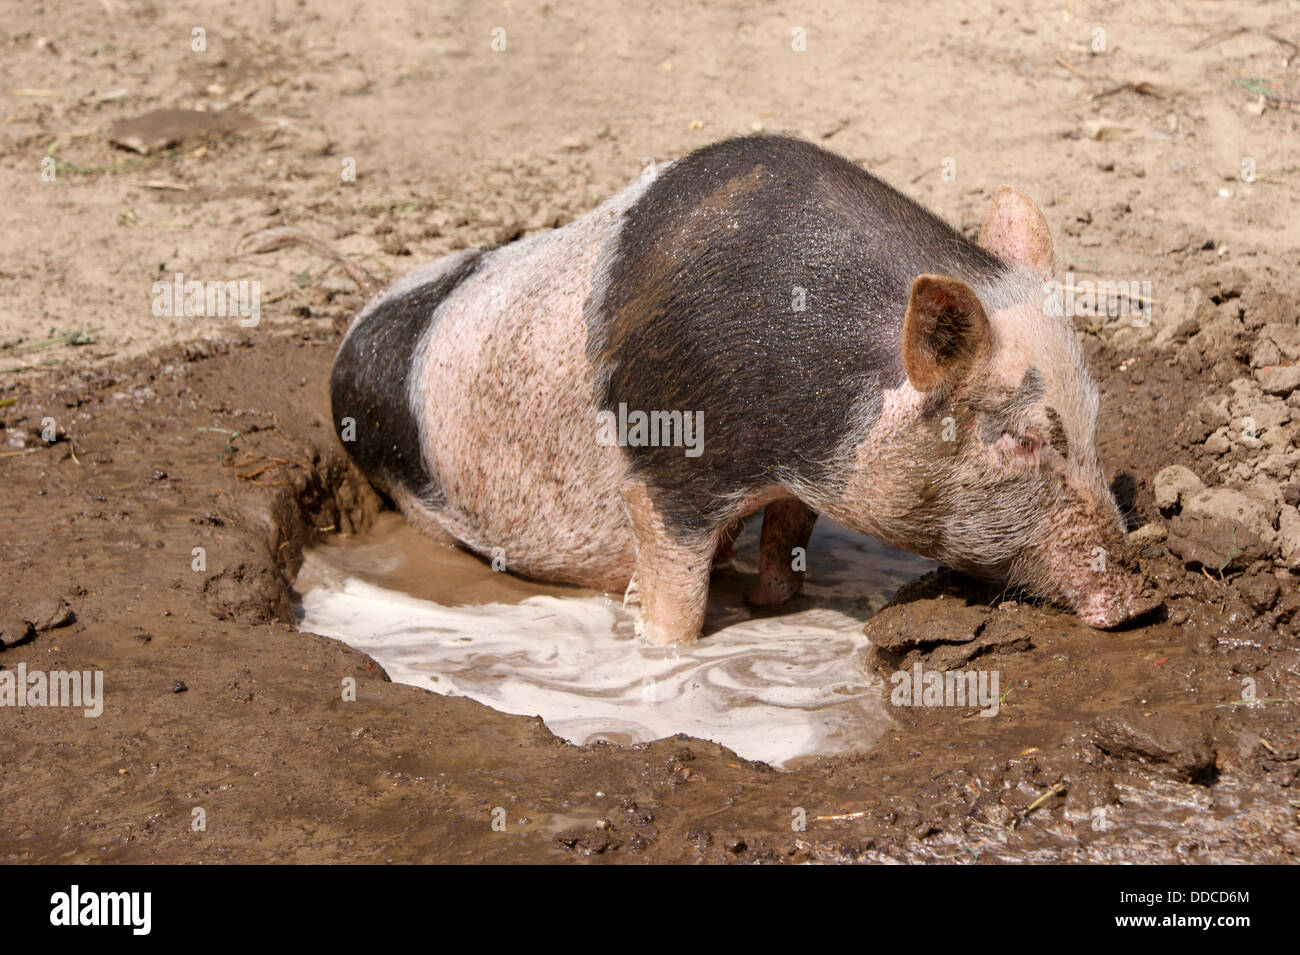 black and white pig wallows in sludge Stock Photo